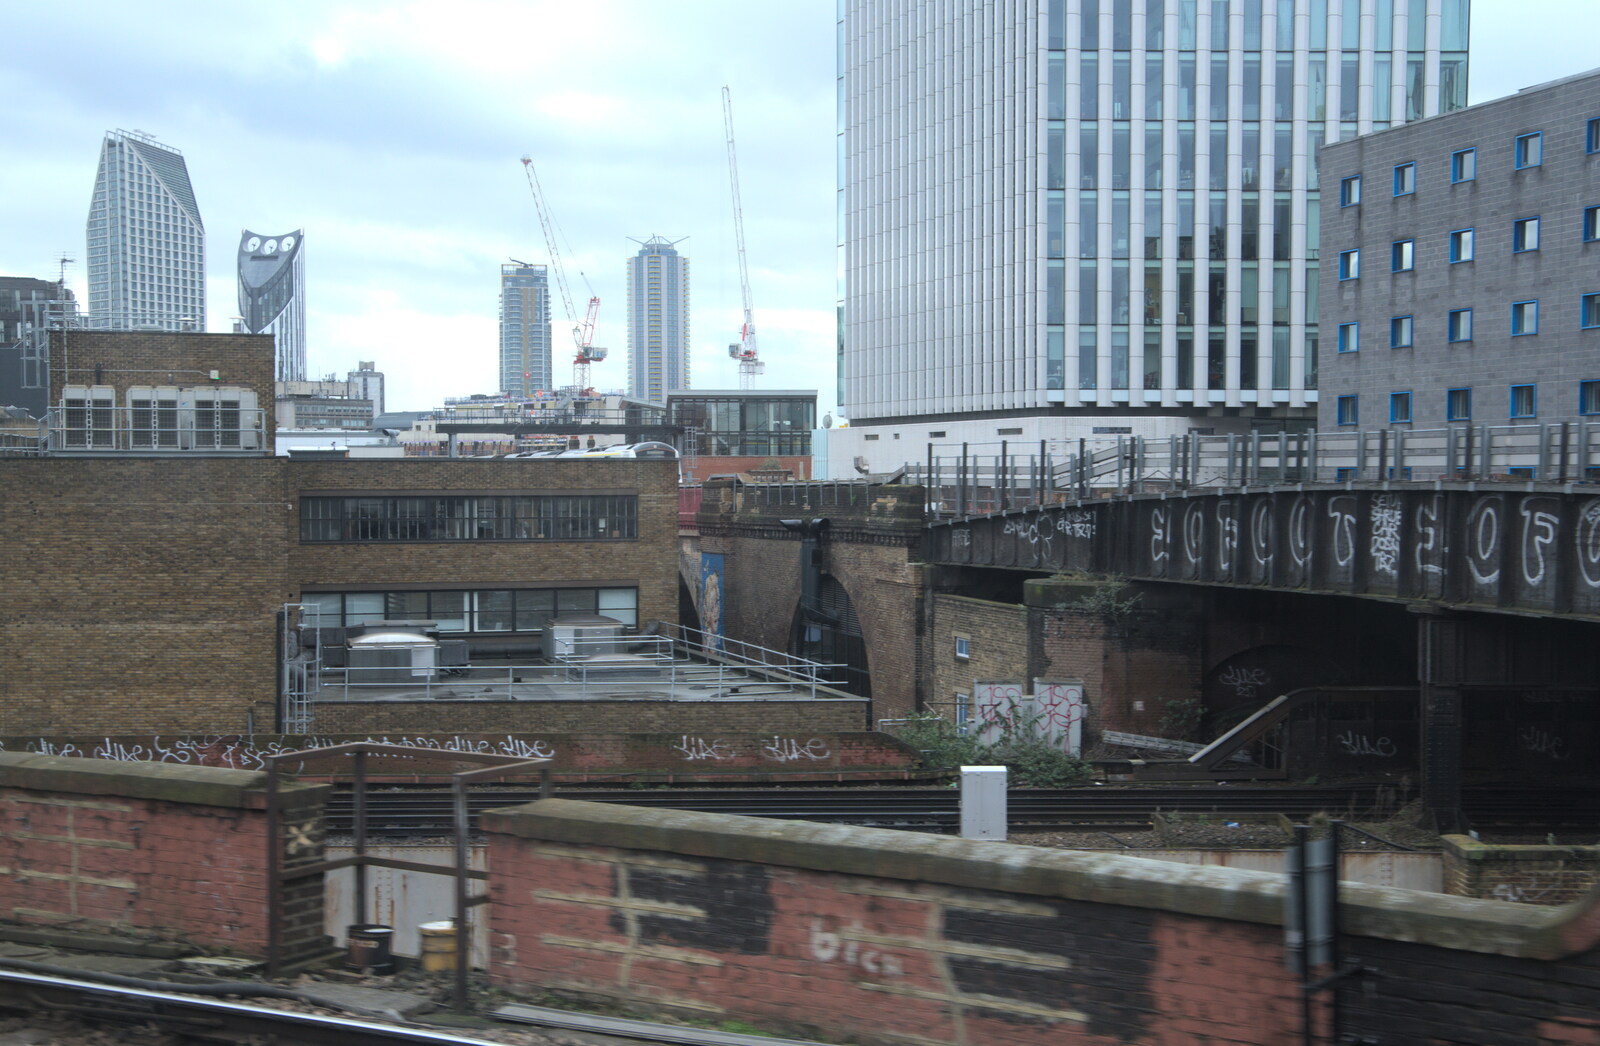 A grim view from the train from HMS Belfast and the South Bank, Southwark, London - 17th February 2020